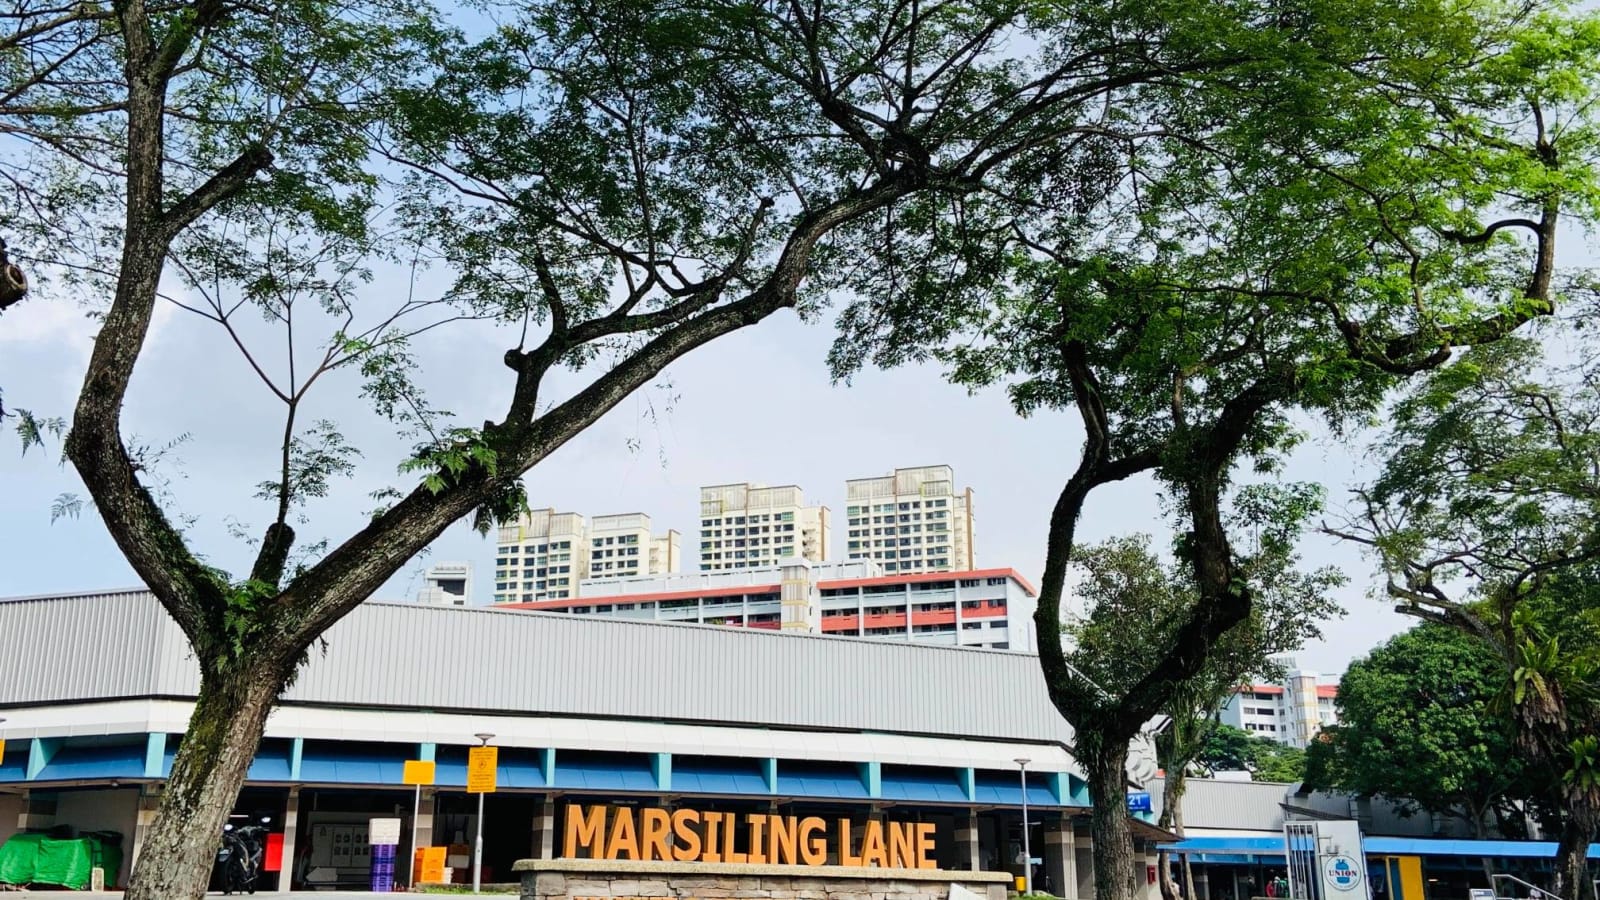 Marsiling Lane Hawker Centre and Wet Market temporarily closed after COVID-19 cases detected